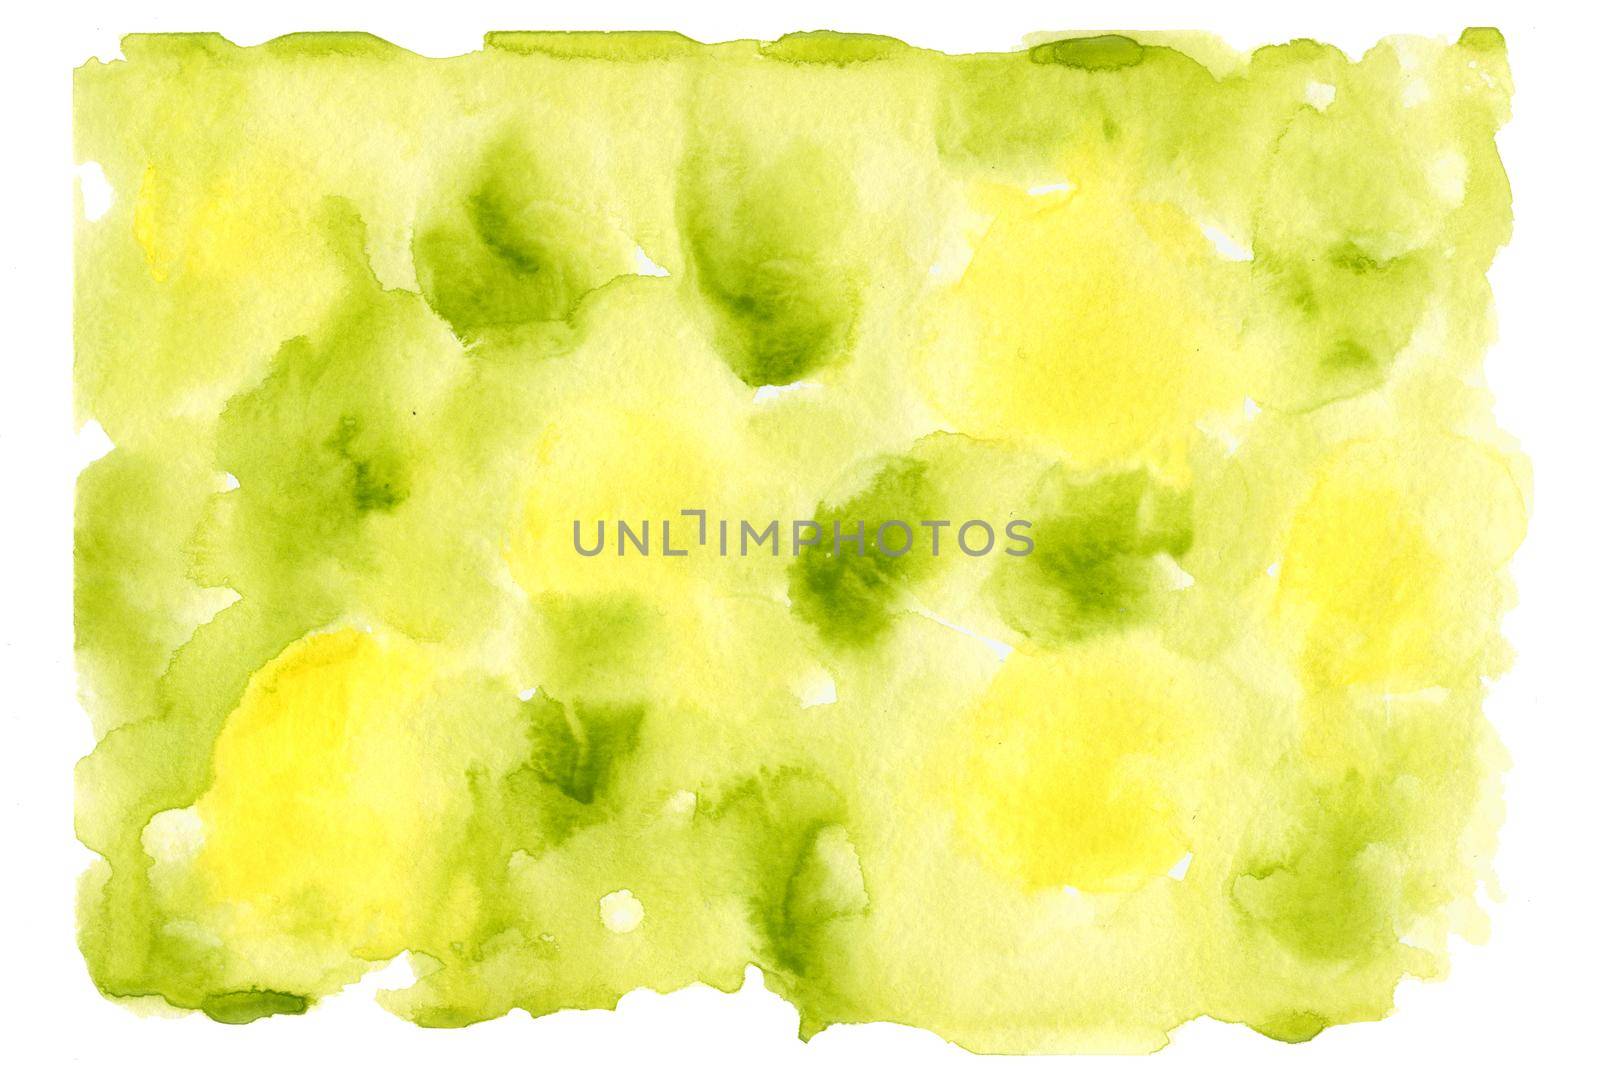 Blurred watercolor background yellow lemon and green. Uneven brush strokes. Spring background for the text. Substrate texture and frames. Blanks for your lettering.